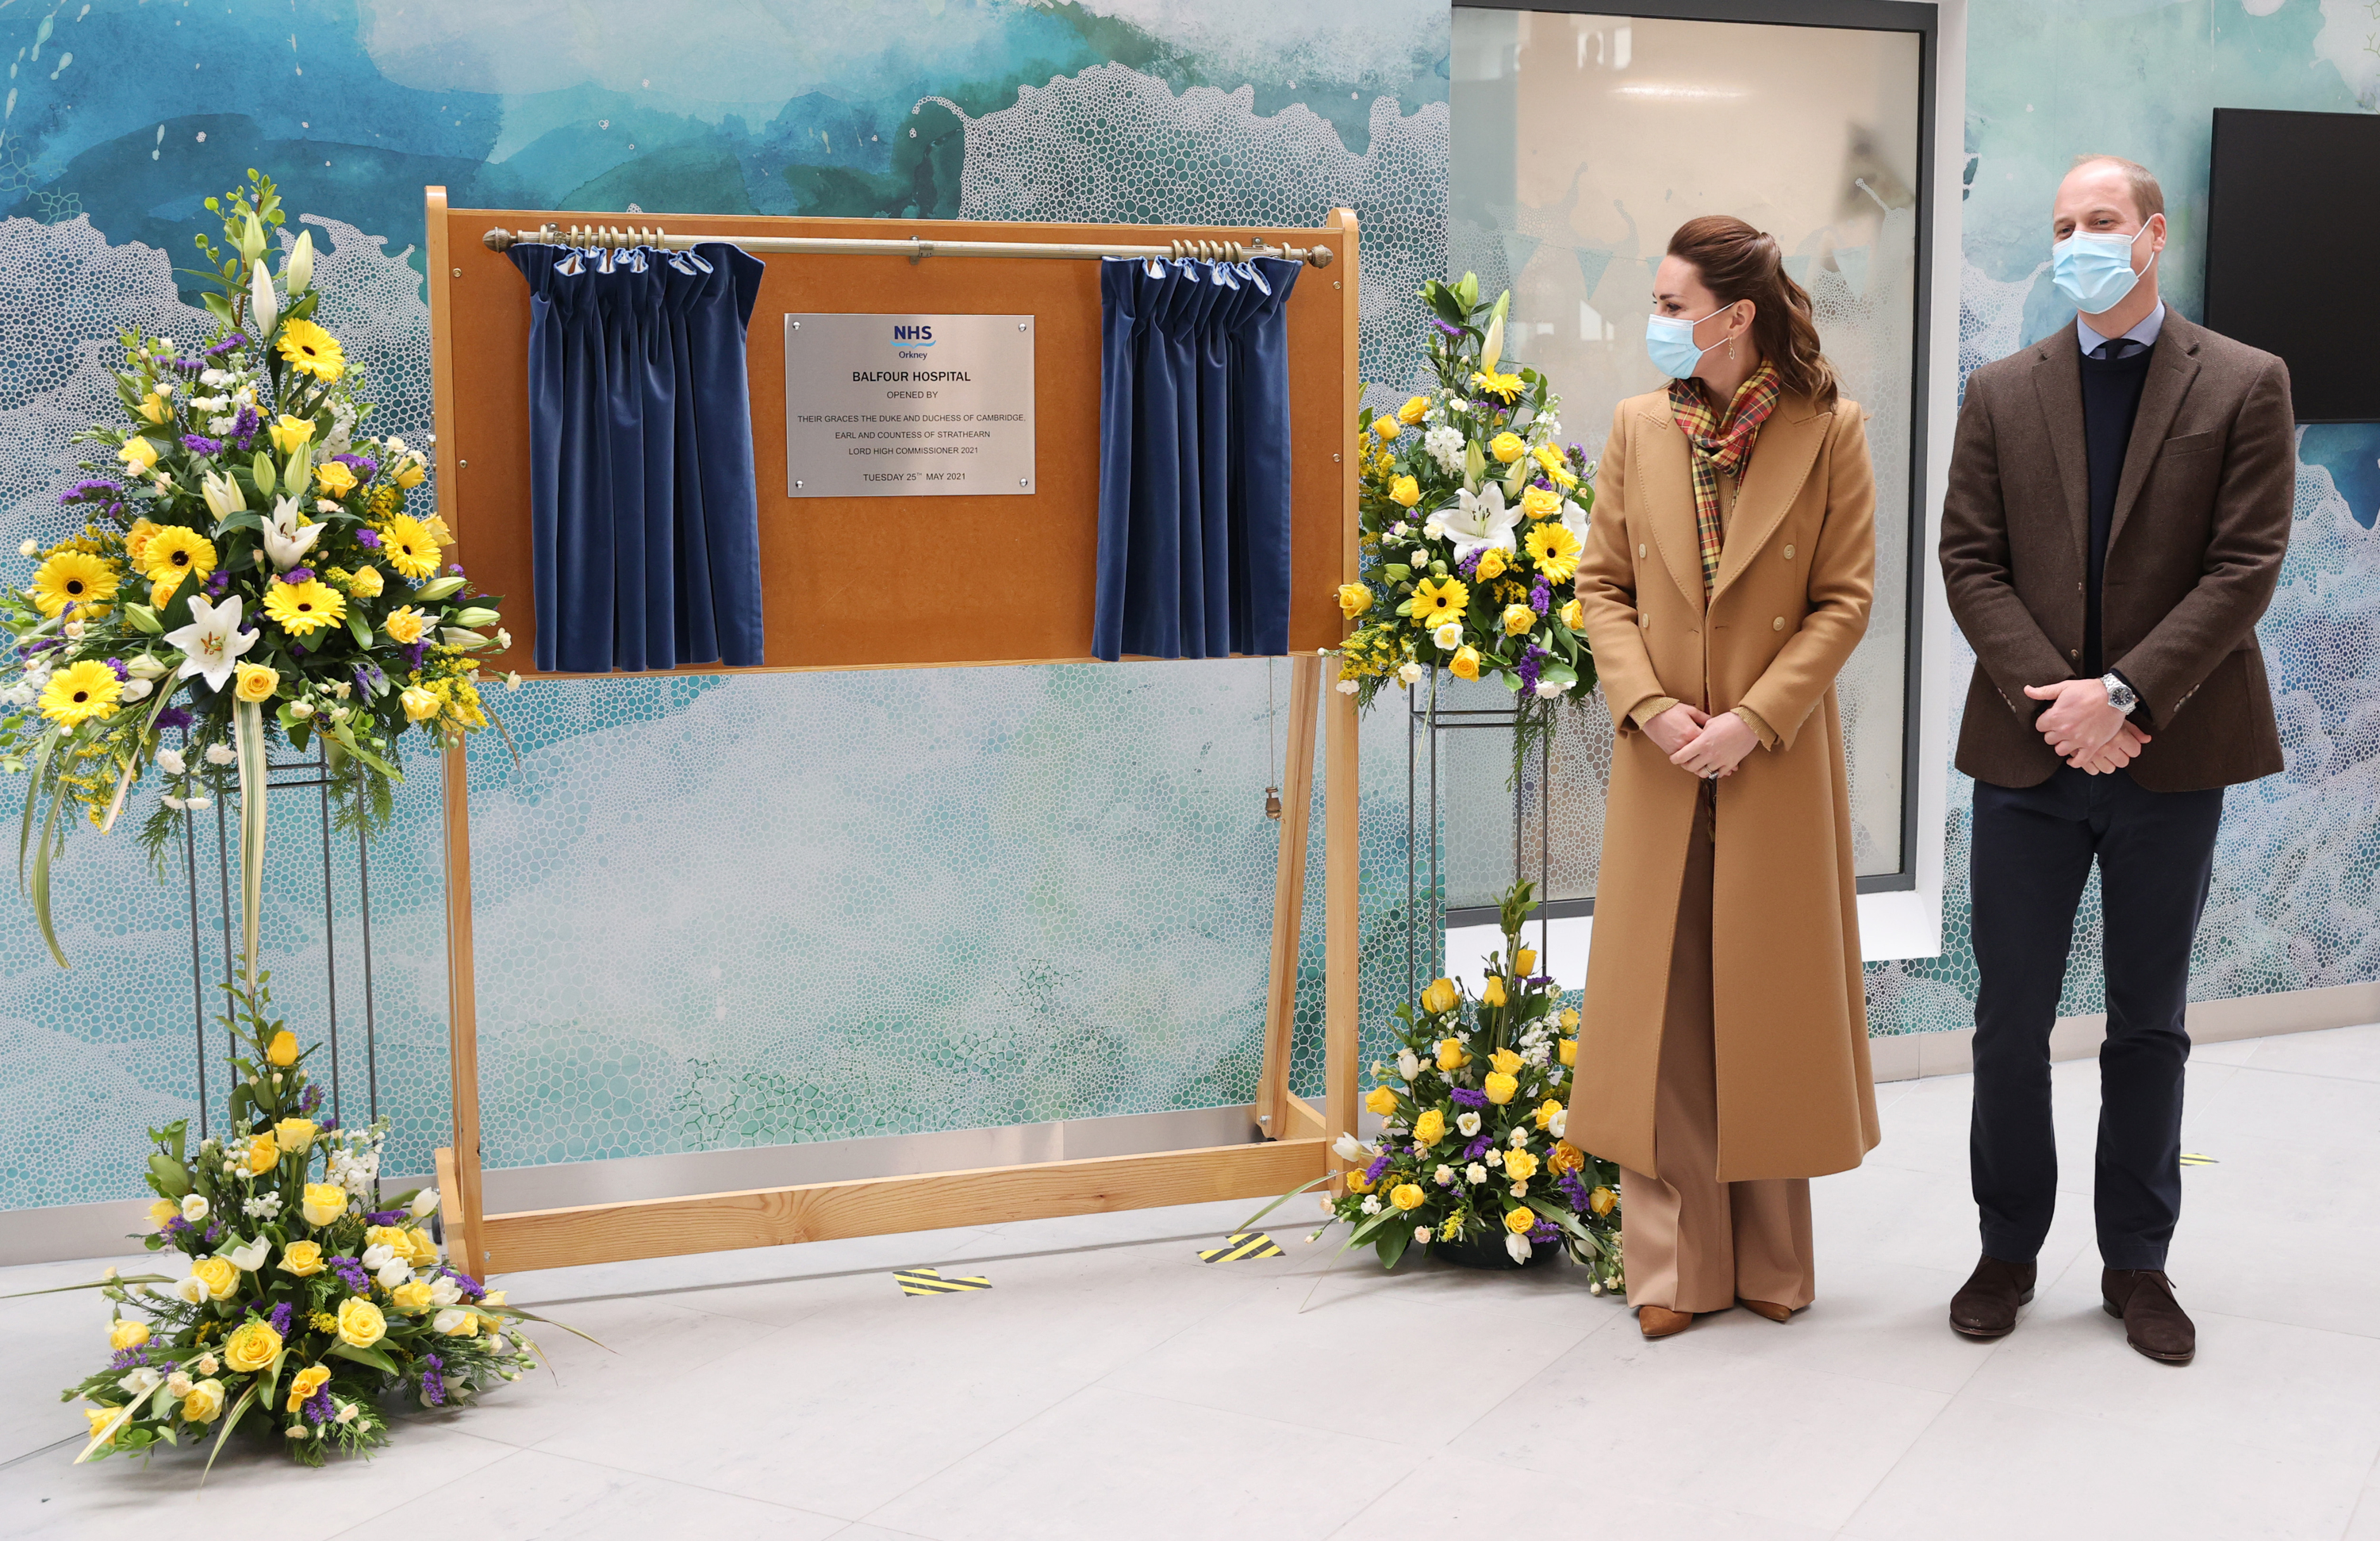 The Duke and Duchess of Cambridge during the official opening of the Balfour, Orkney’s new hospital in Kirkwall.